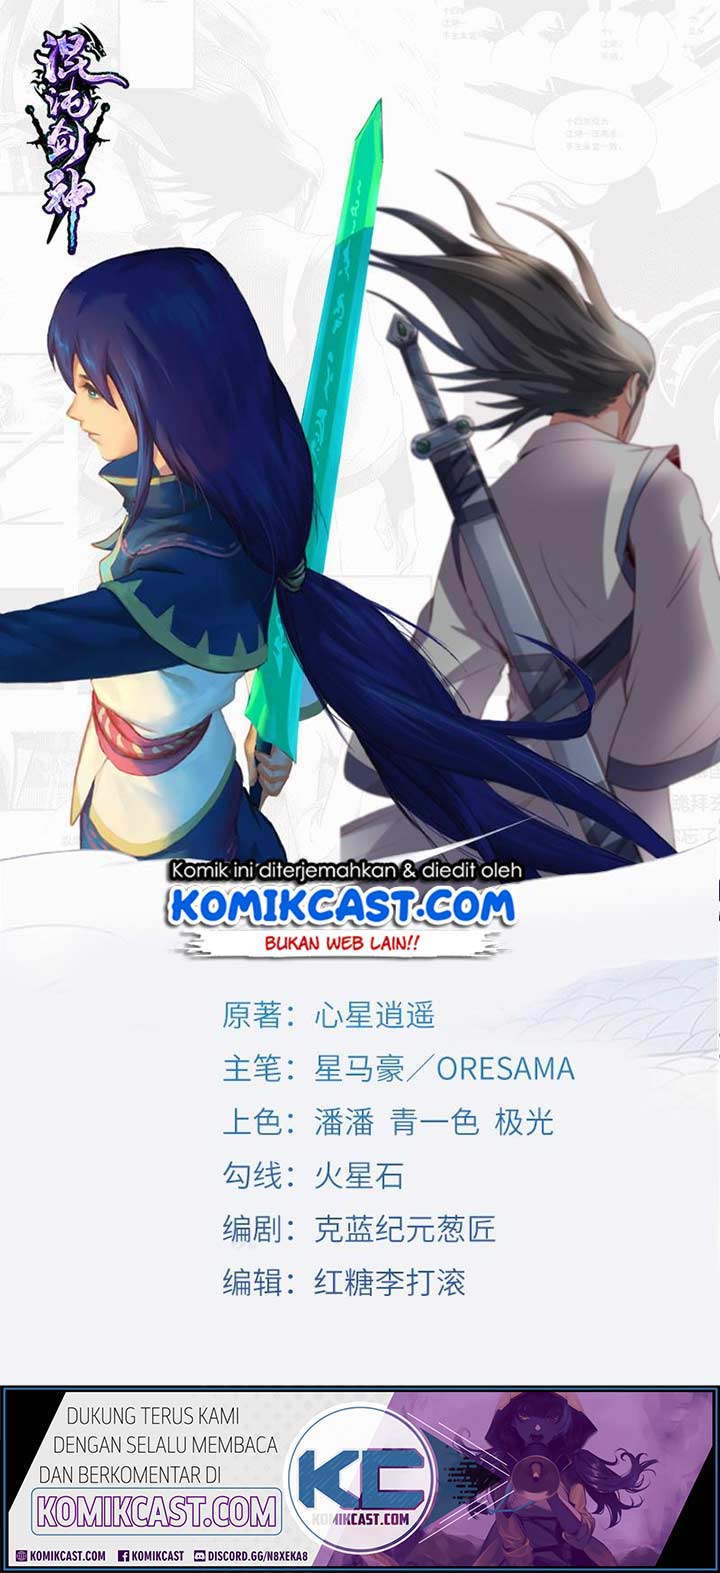 Chaotic Sword God Chapter 182